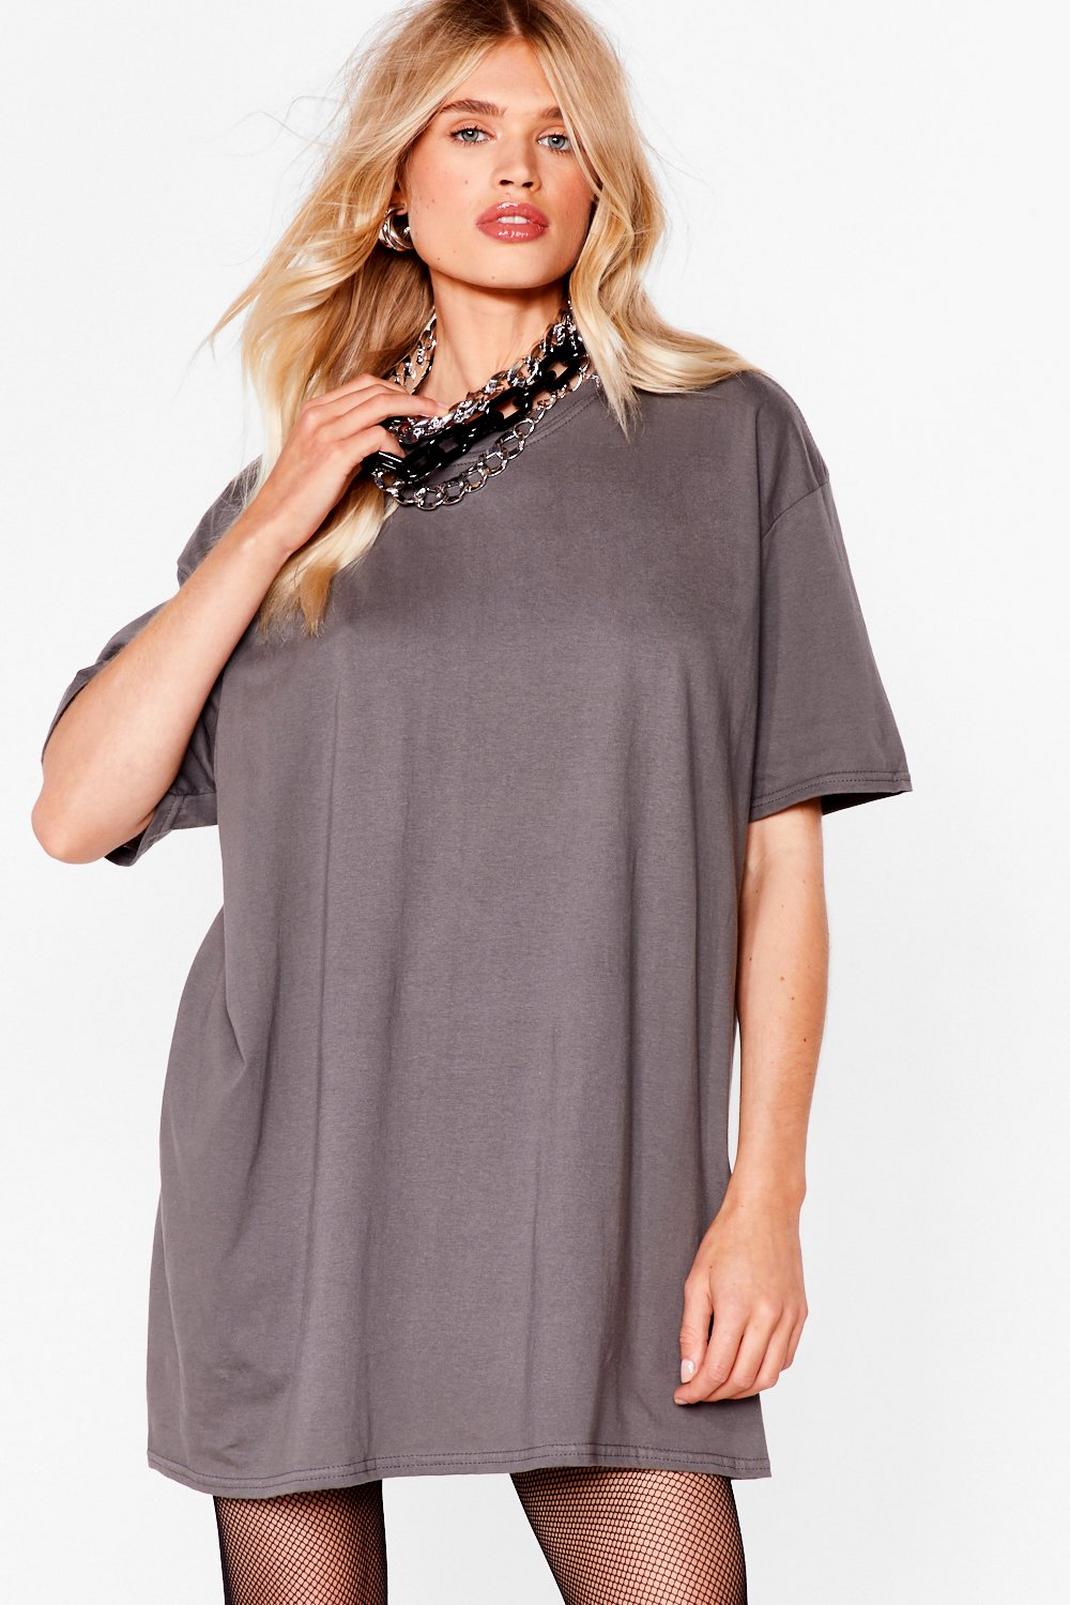 Charcoal Easy Does It Tee Dress image number 1